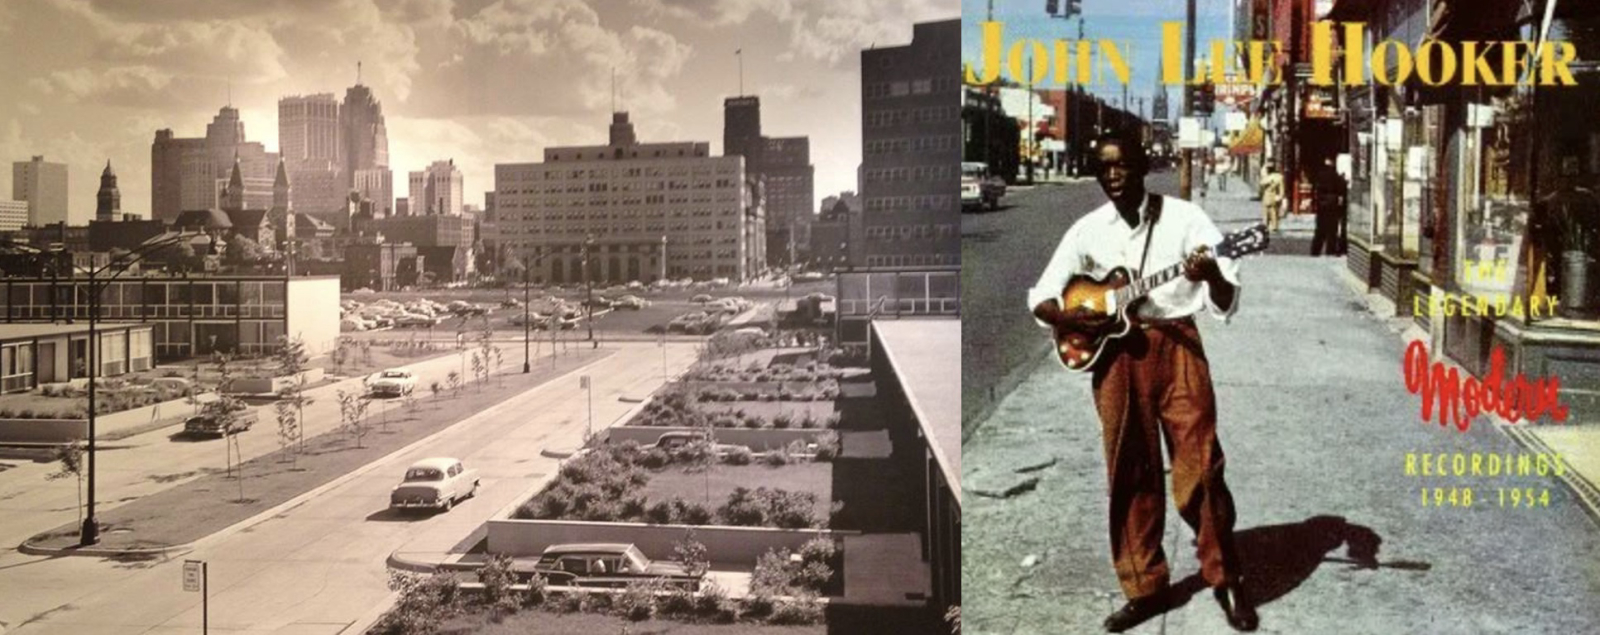  Aerial View of Detroit showing Lafayette Park and the Detroit Skyline, circa 1960s; John Lee Hooker in front of Joe's Record Shop on Hasting Street, Detroit,1959